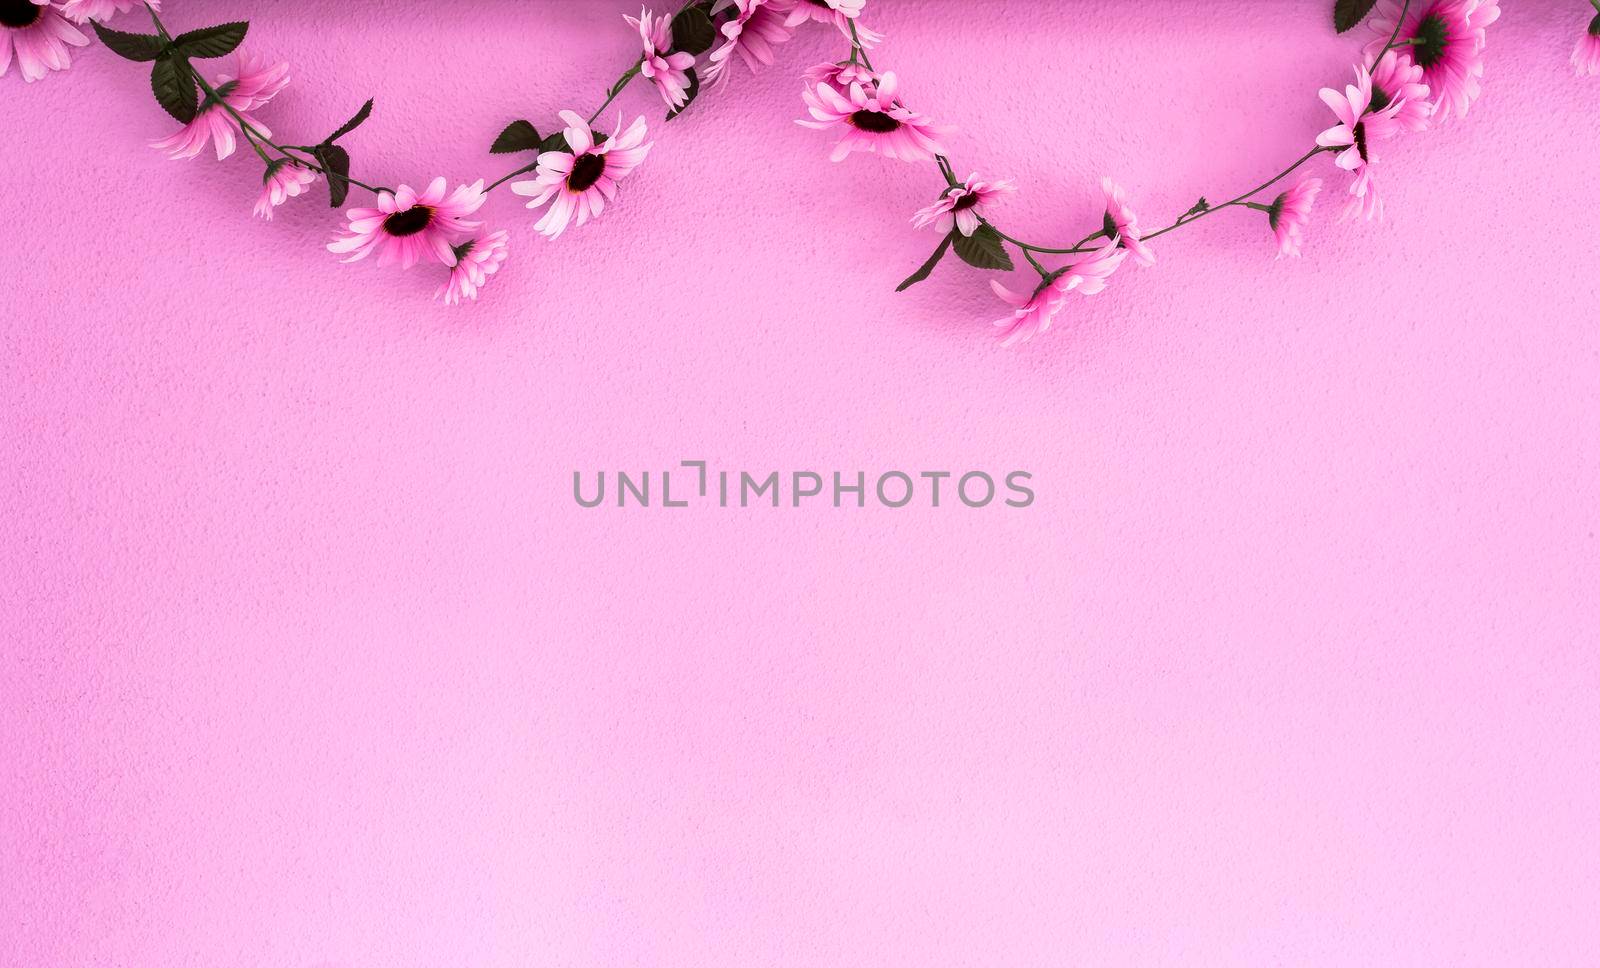 Cheerful, colorful pink, purple daisies garland hanging on pink wall background texture. beautiful modern design with copy space abstract decoration with flowers